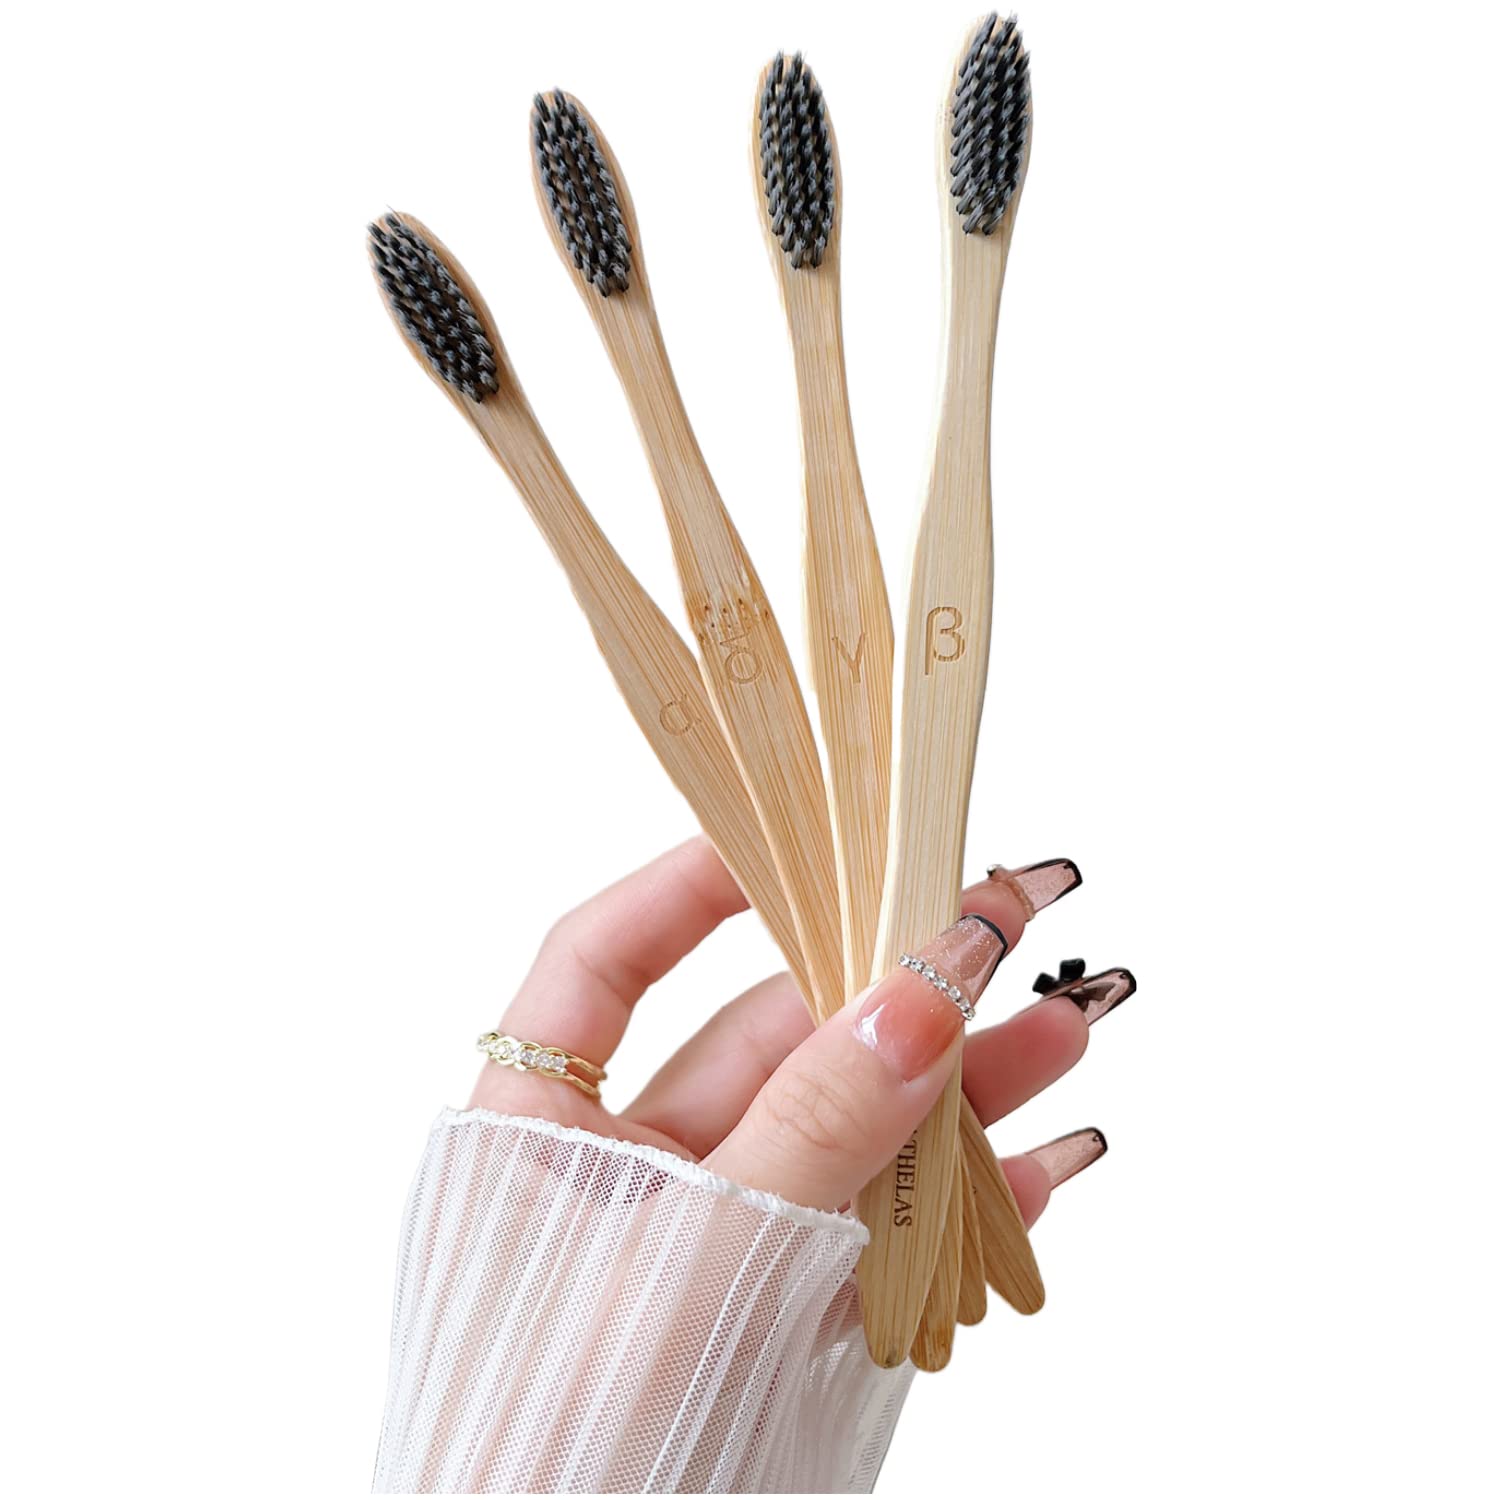 Athelas Premium Set of 4 Charcoal Activated Bamboo Toothbrushes. Eco Friendly 100% Natural Toothbrushes with Medium Soft Charcoal Bristles